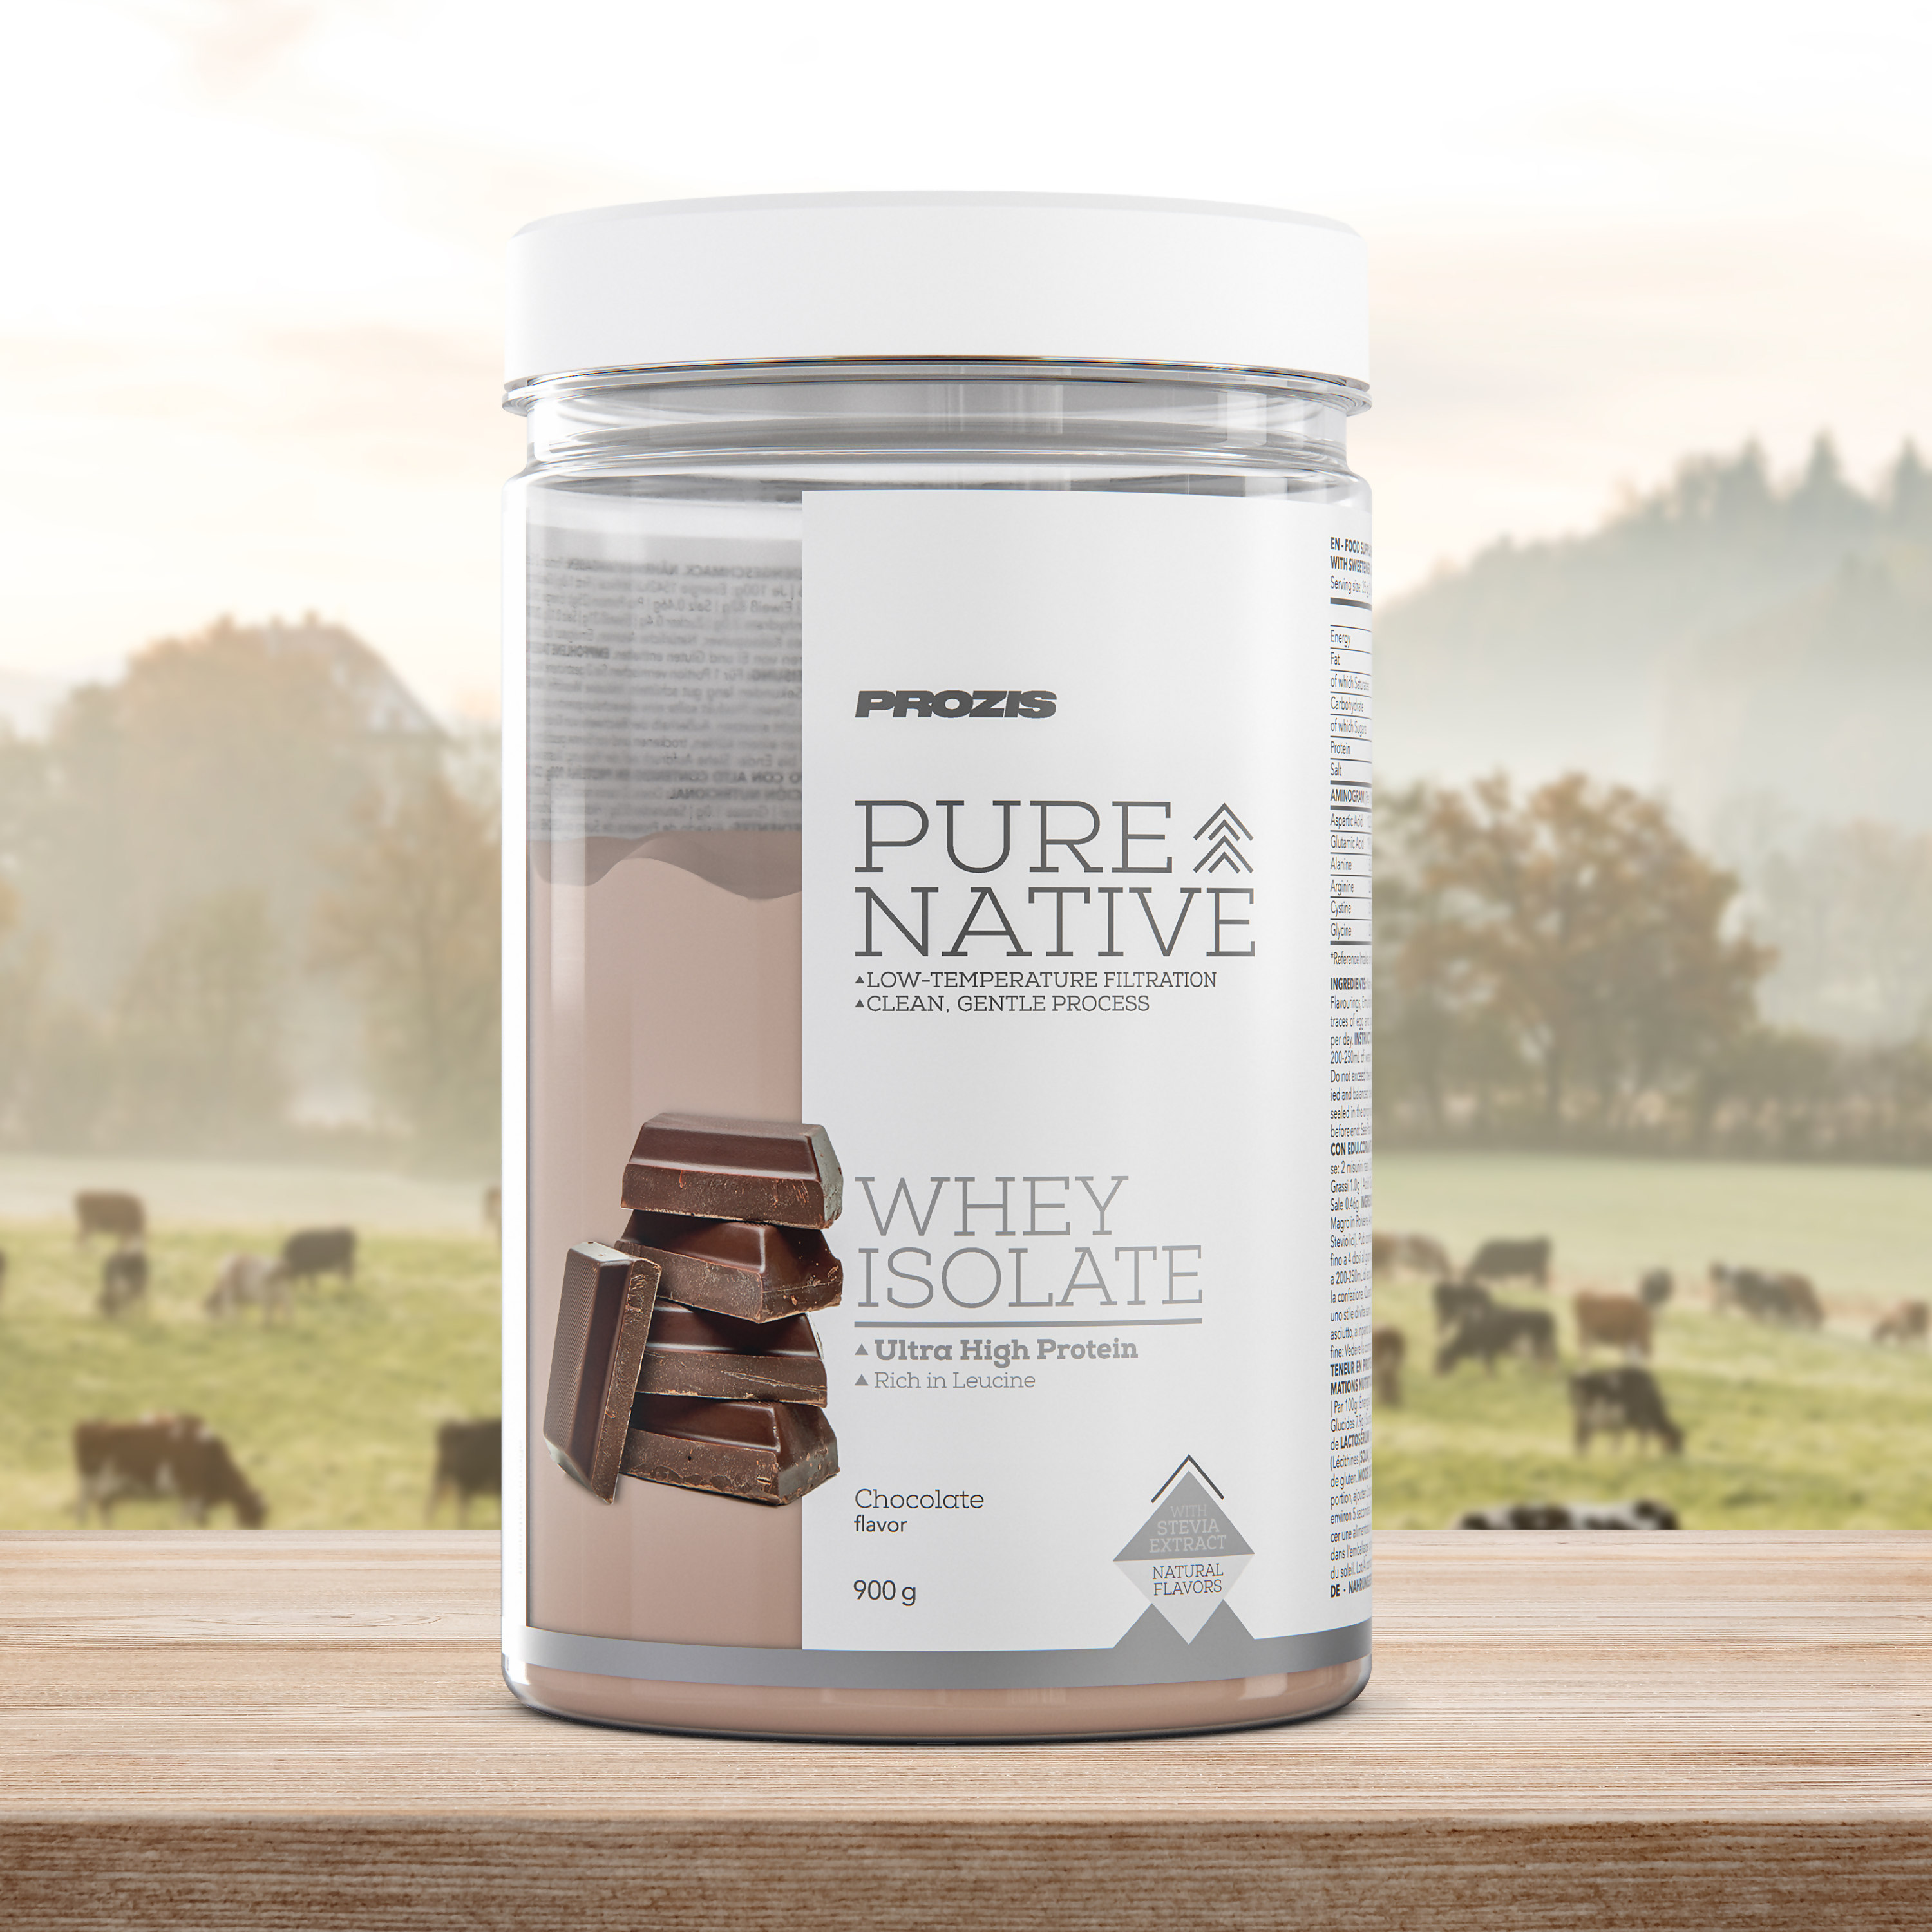 plus erven prins Natural Pure Native Whey Isolate 900 g - Diet Food | Prozis